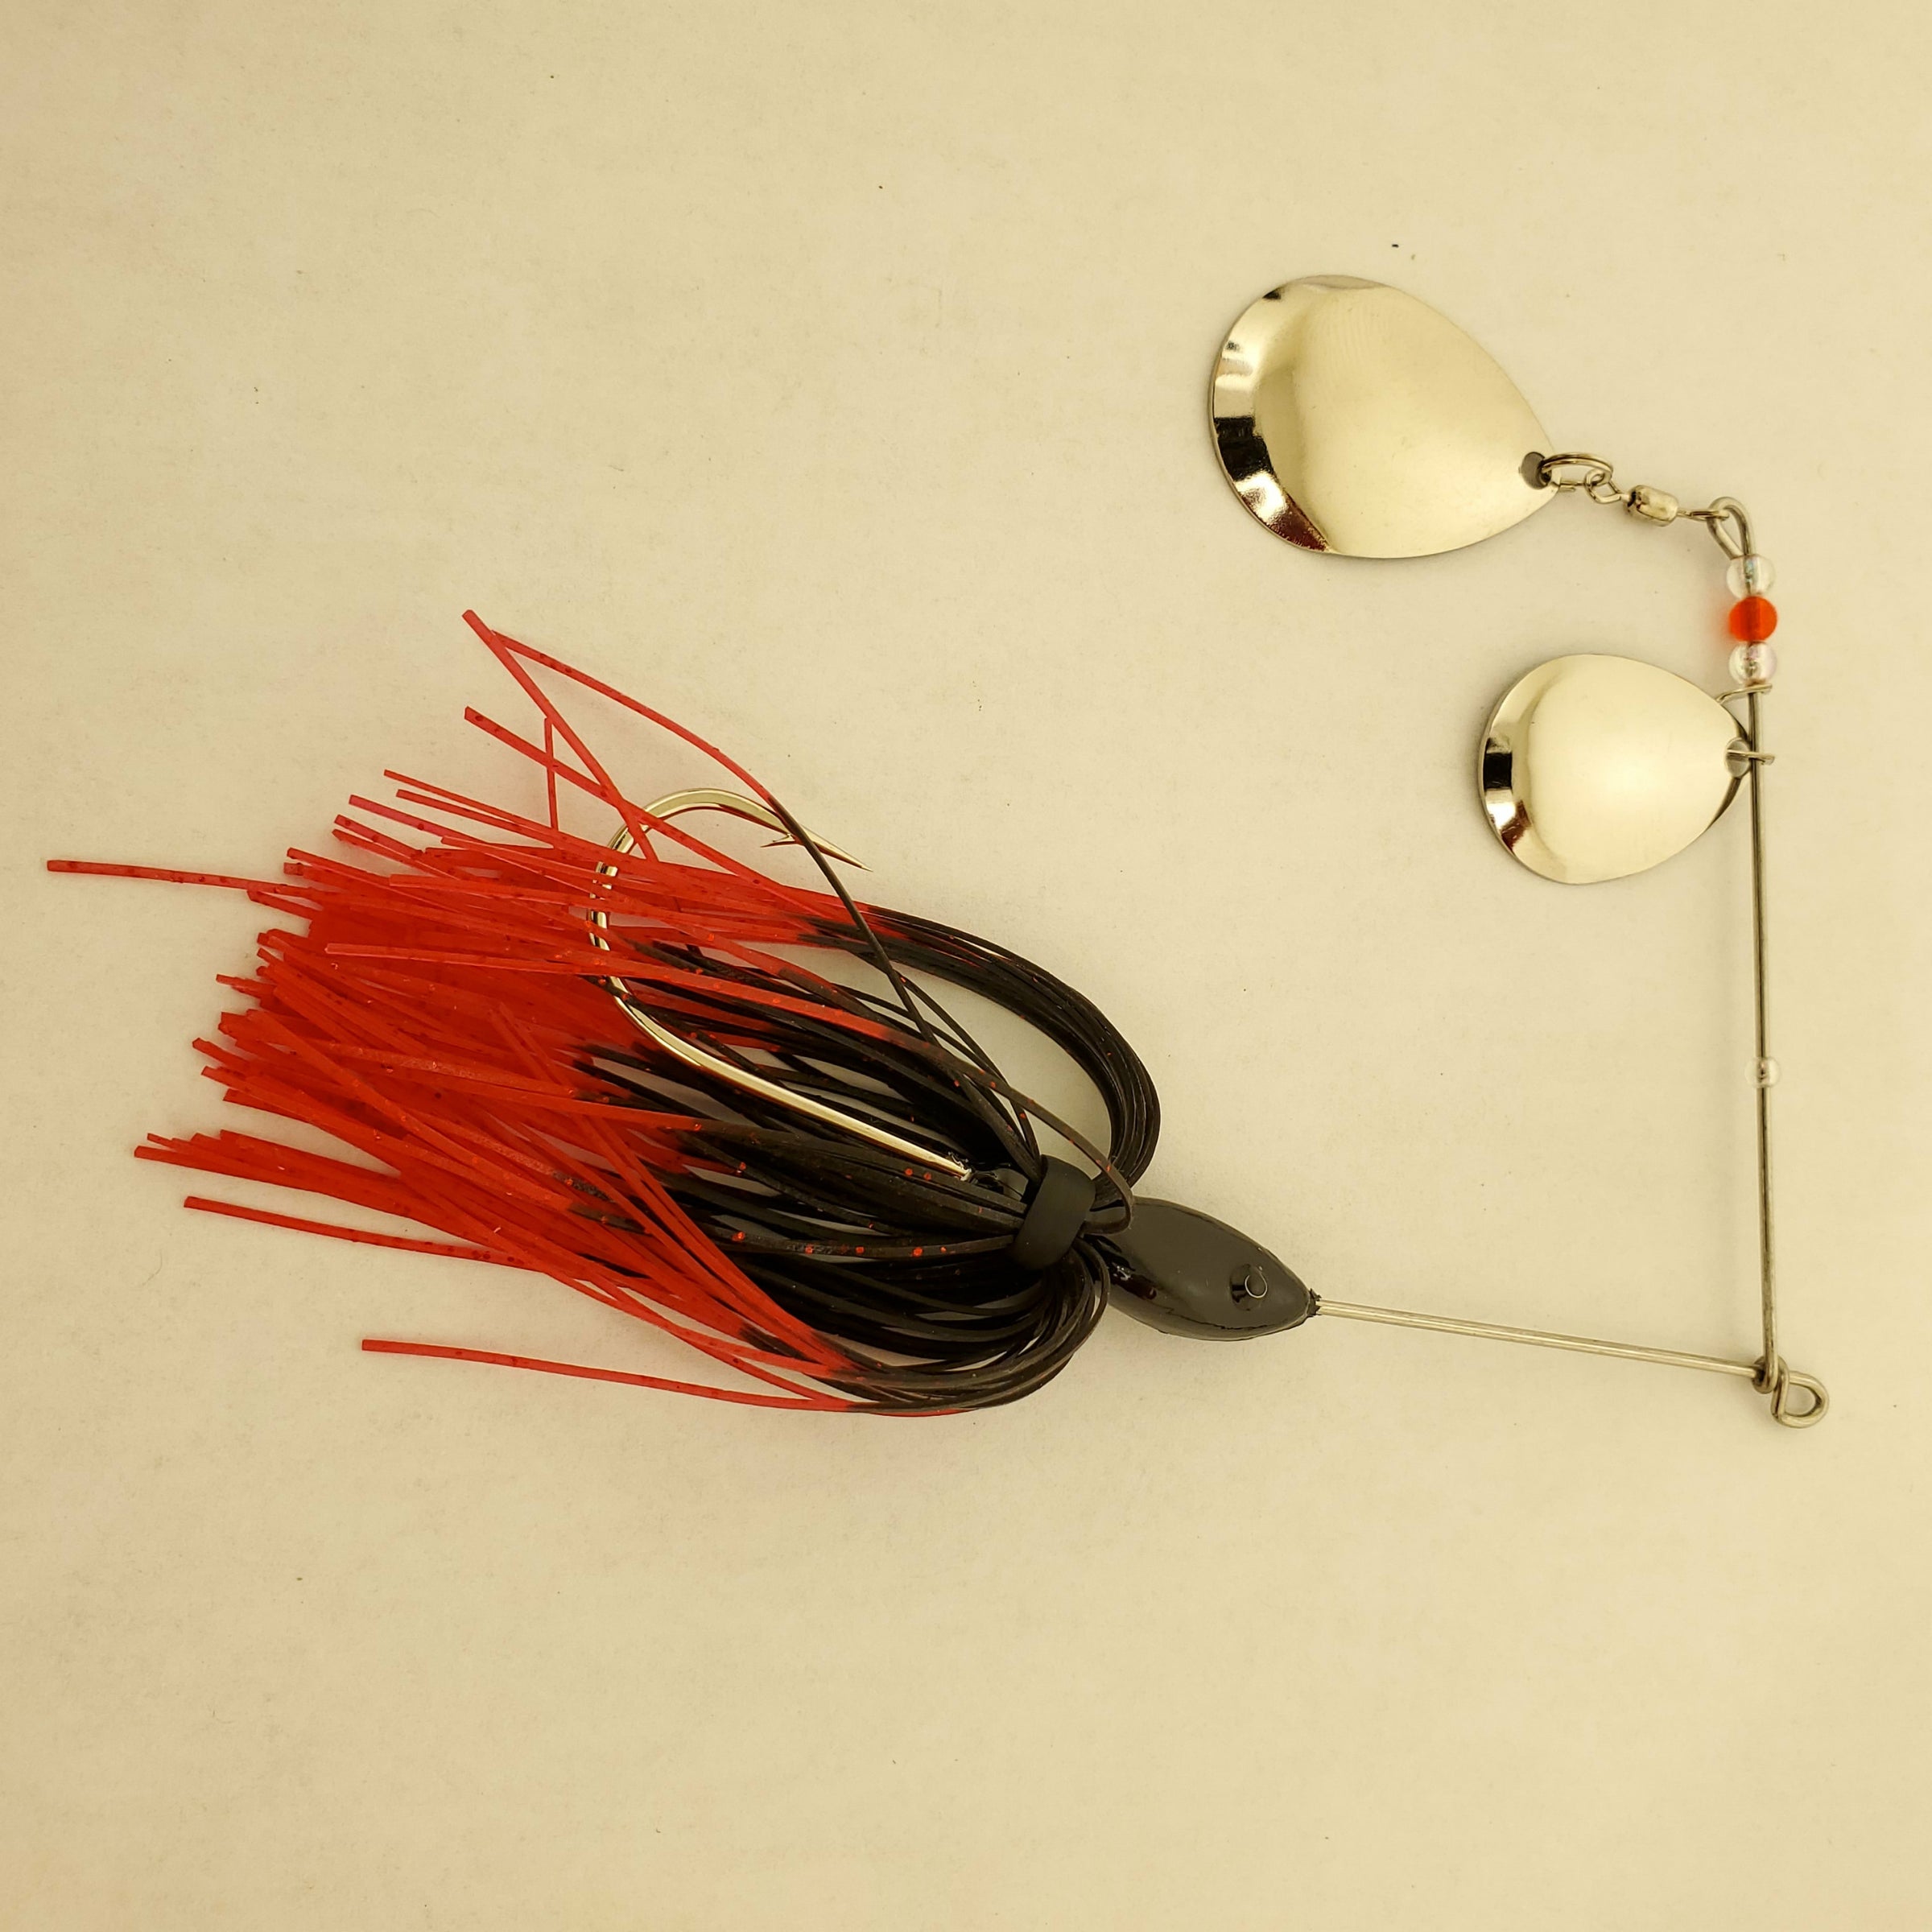 Spinnerbait #13 Nickle Colorado blades, Black and Red Skirt